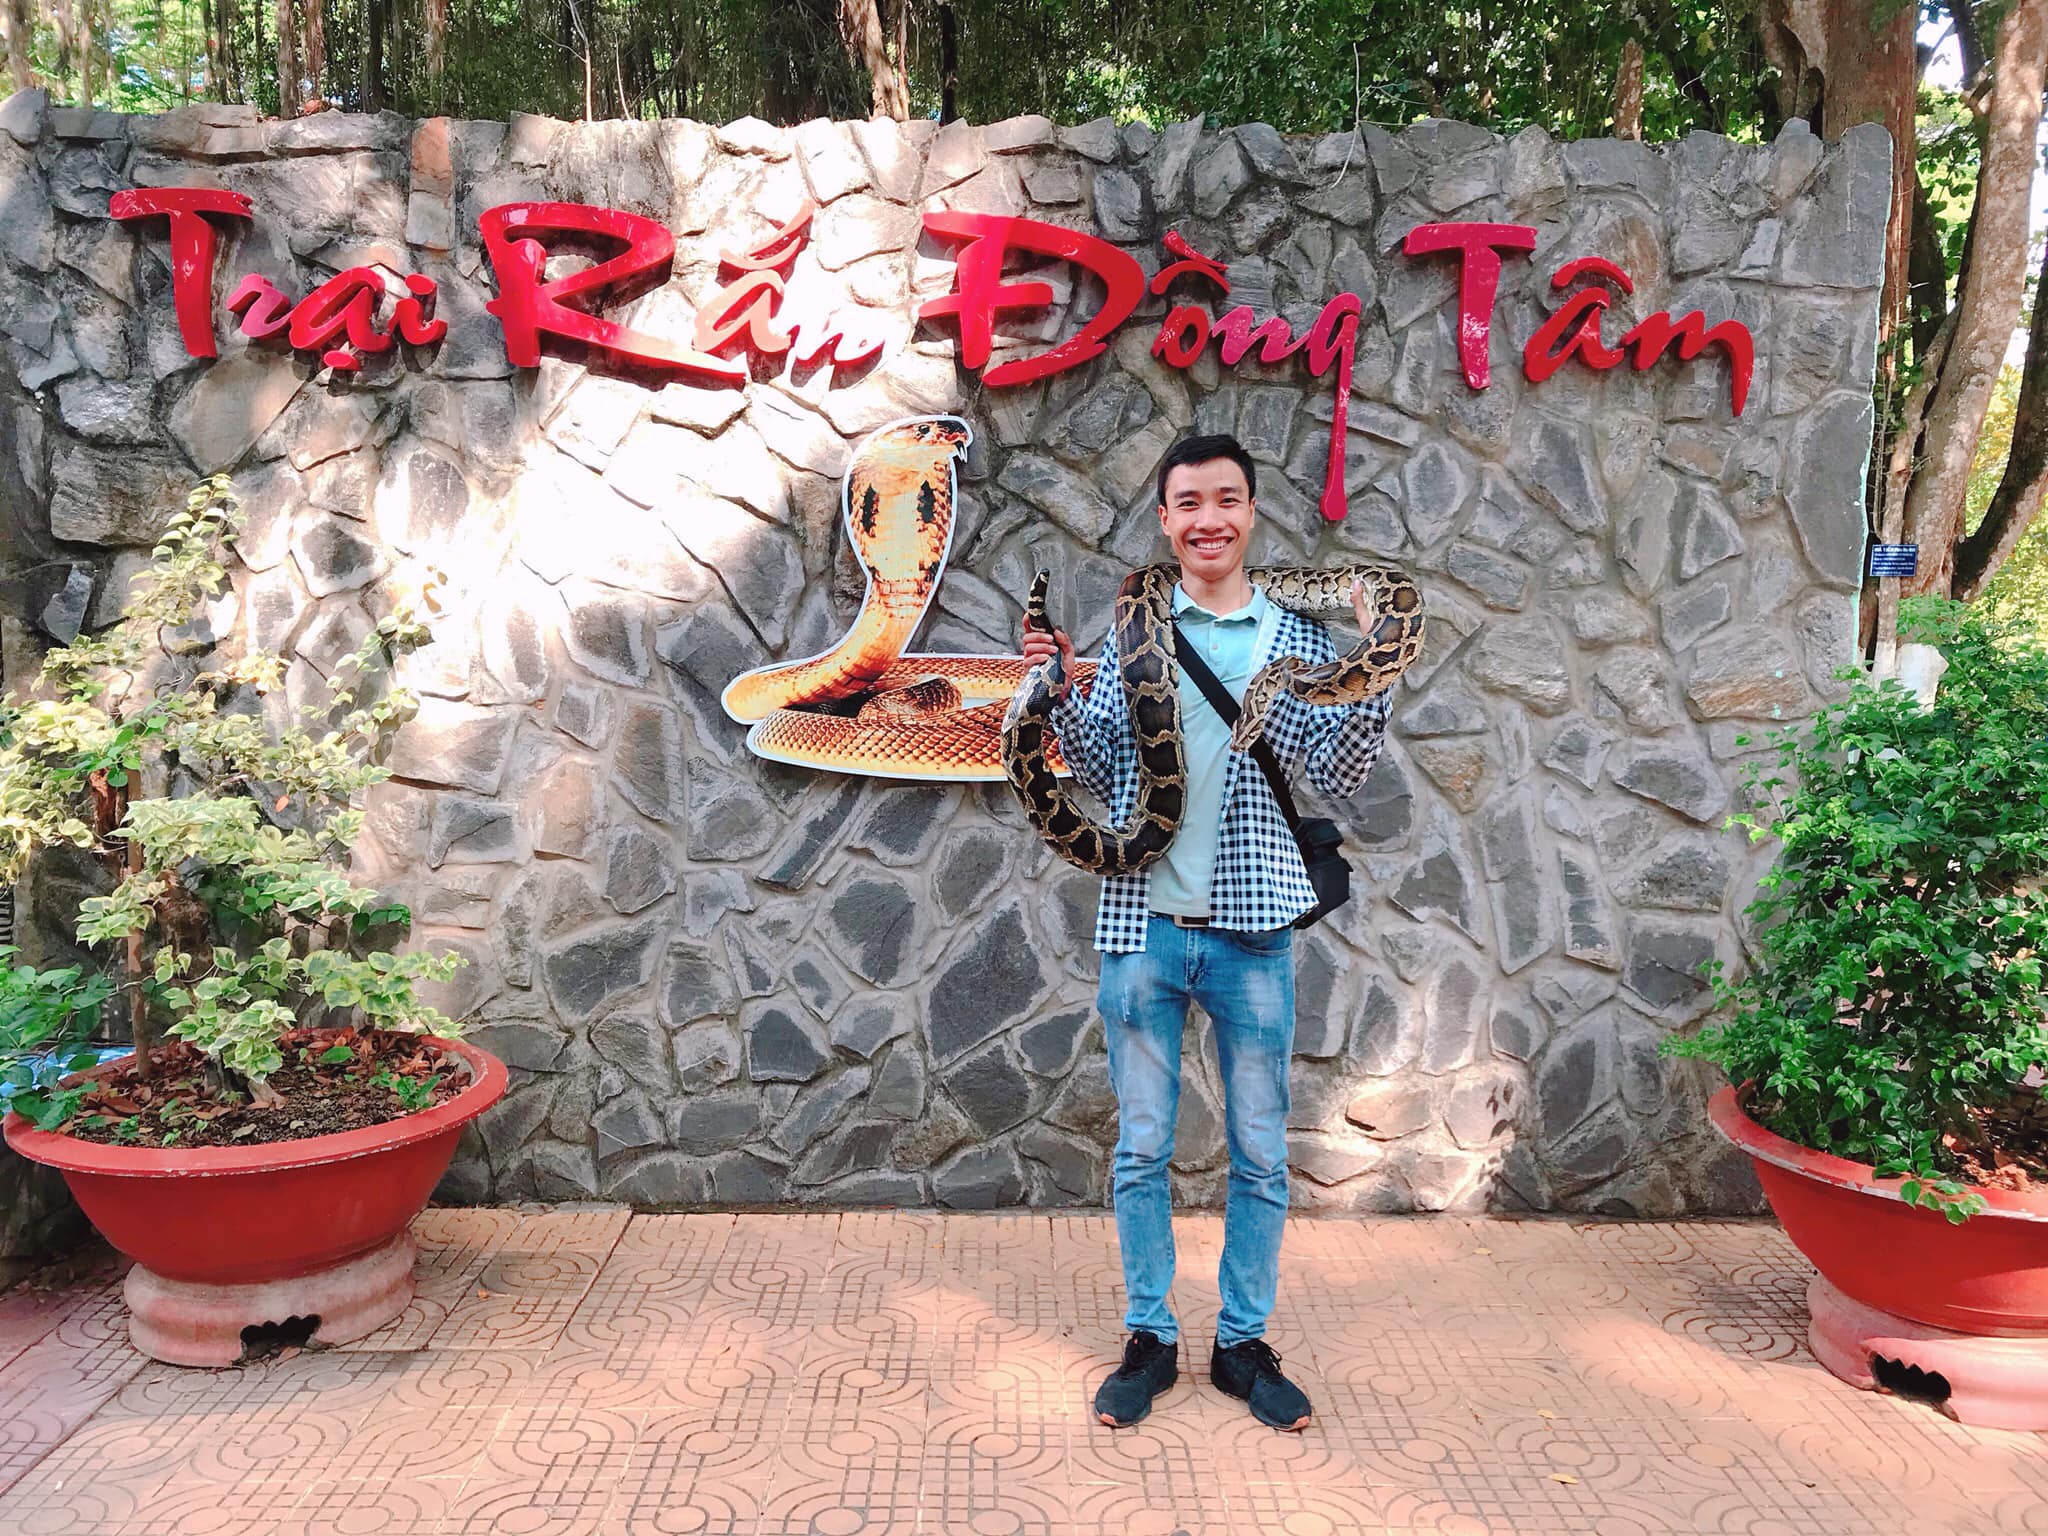 Dong Tam Snake Farm – What to Do in My Tho, Tien Giang